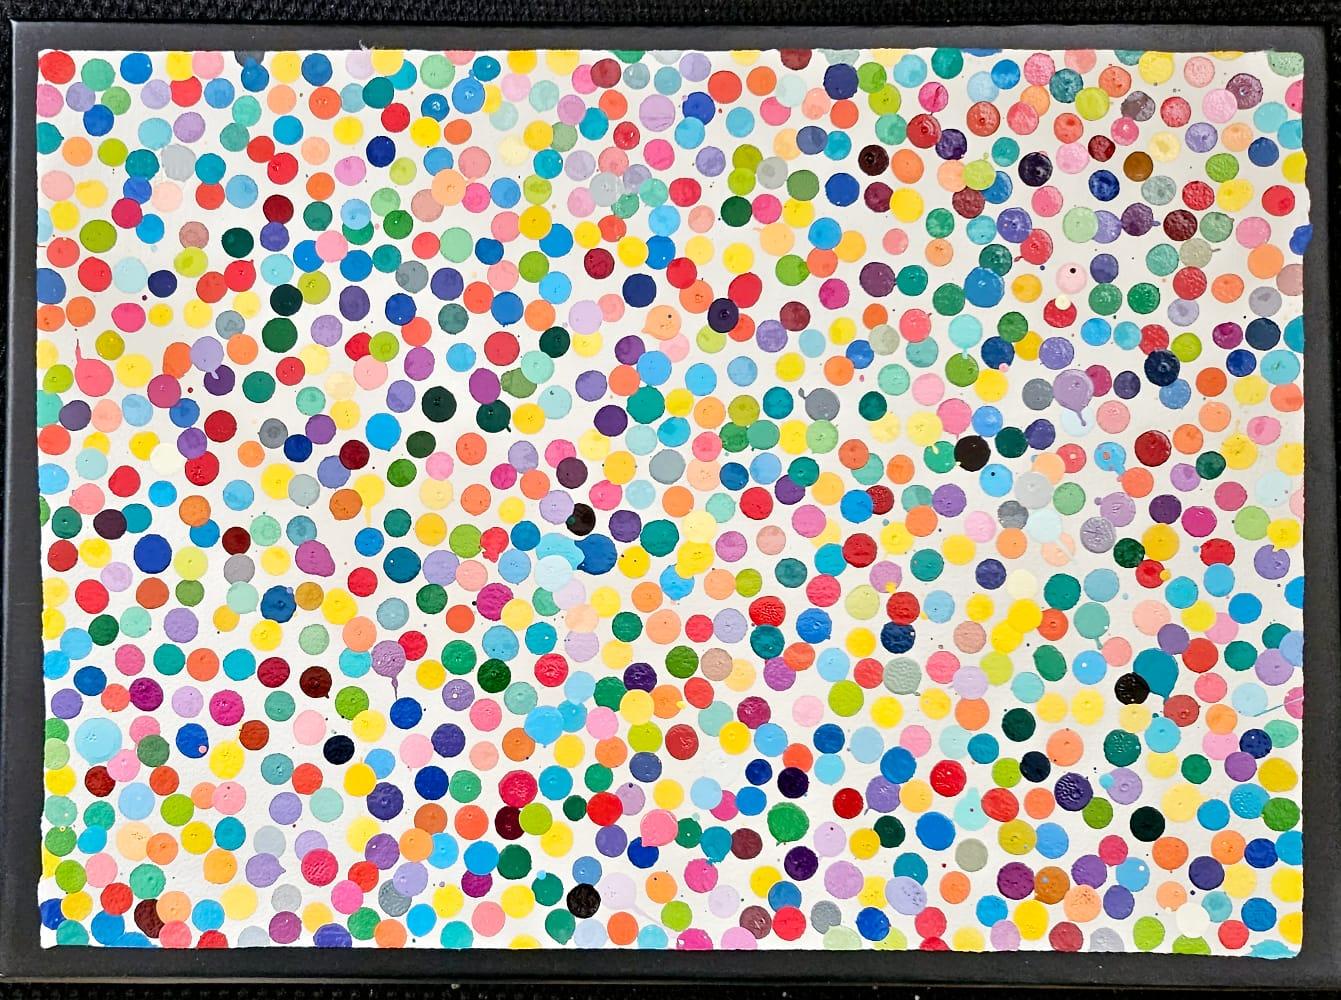 Damien Hirst - Bodies of Love (from The Currency, 2016)